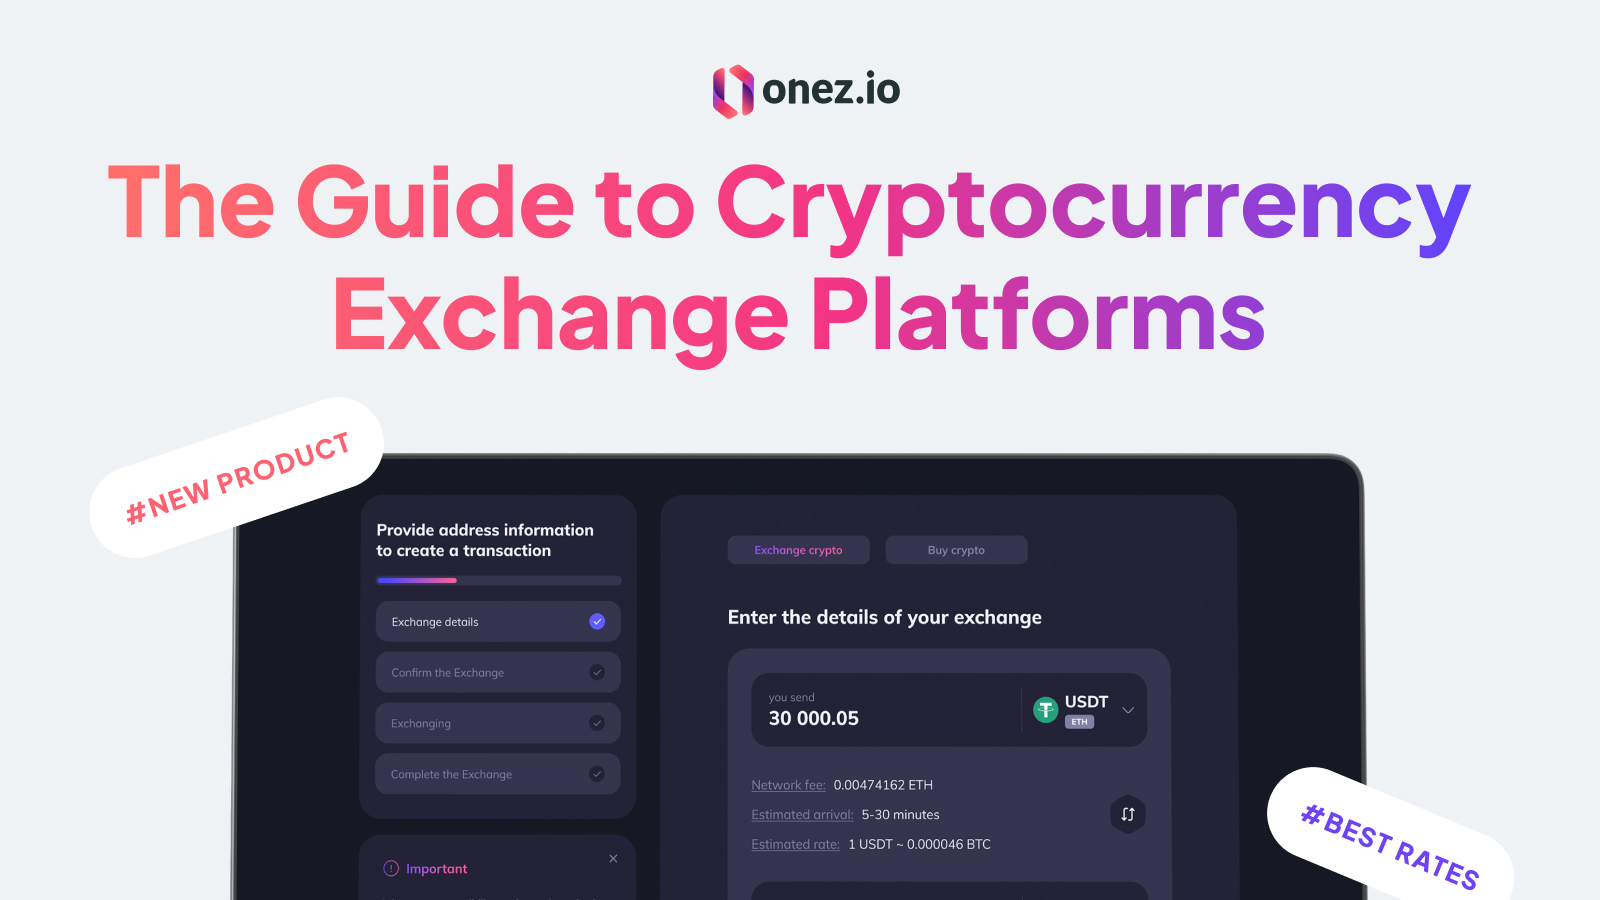 The Guide to Cryptocurrency Exchange Platforms